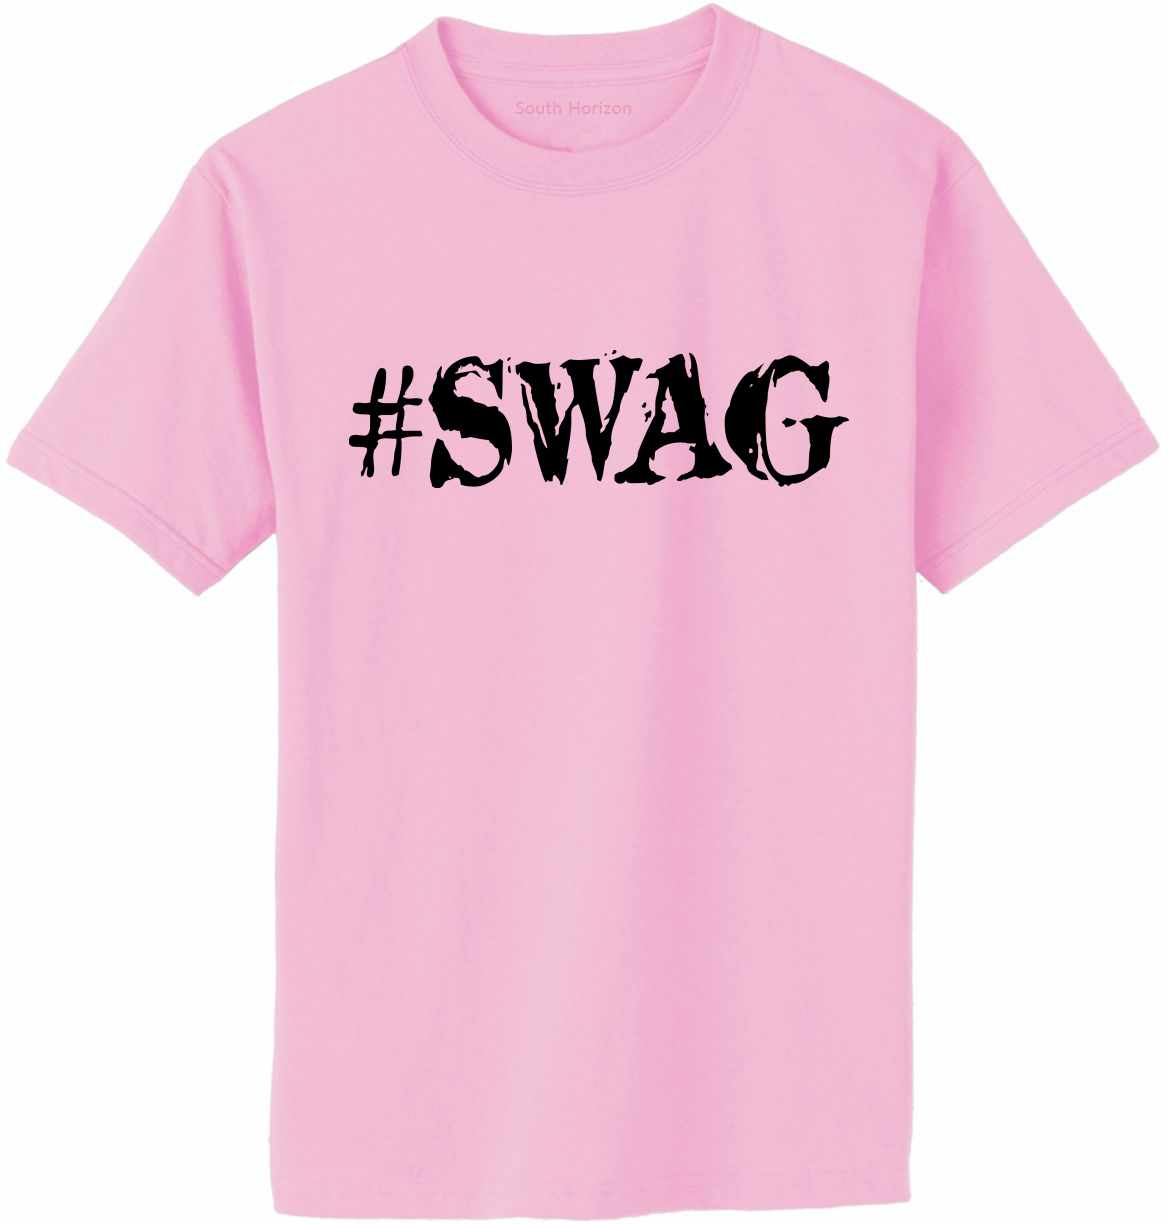 SWAG Adult T-Shirt (#799-1)